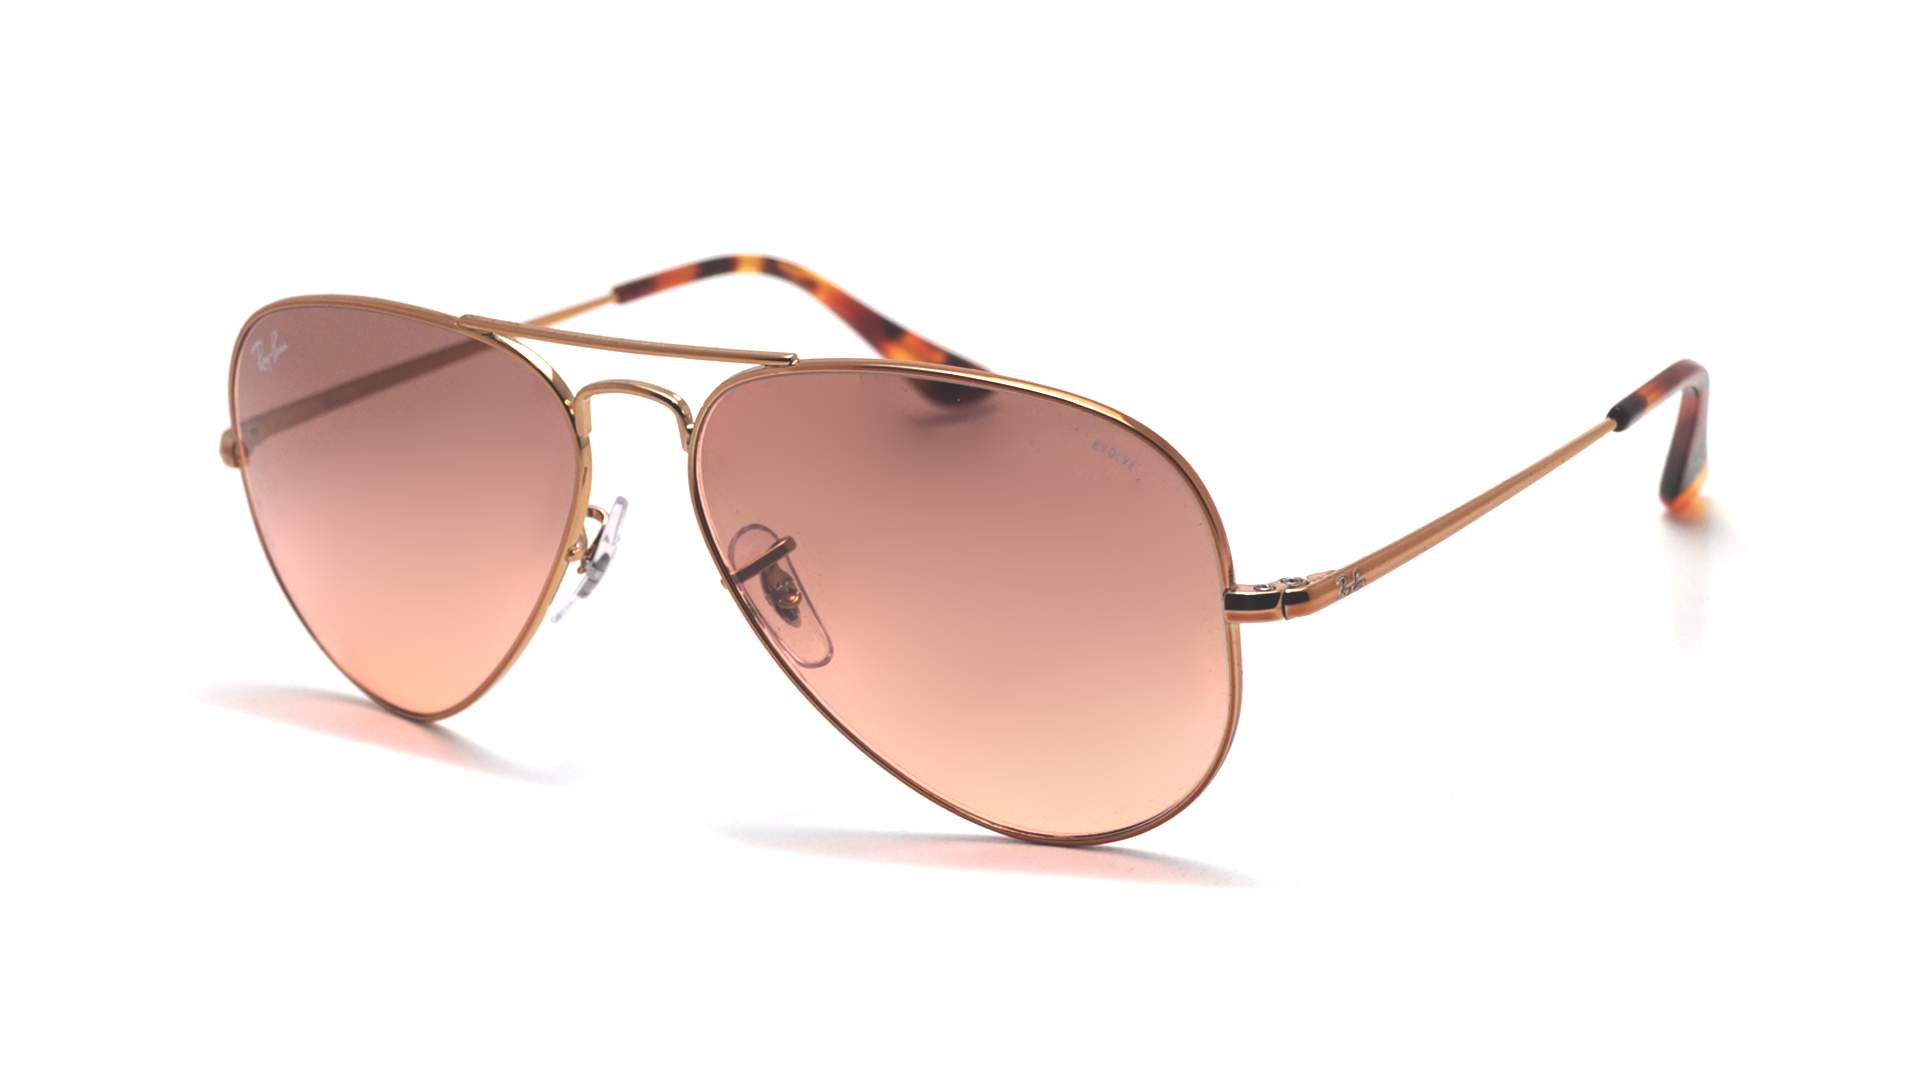 Ray-Ban Evolve Pink RB3689 9151AA 55-14 